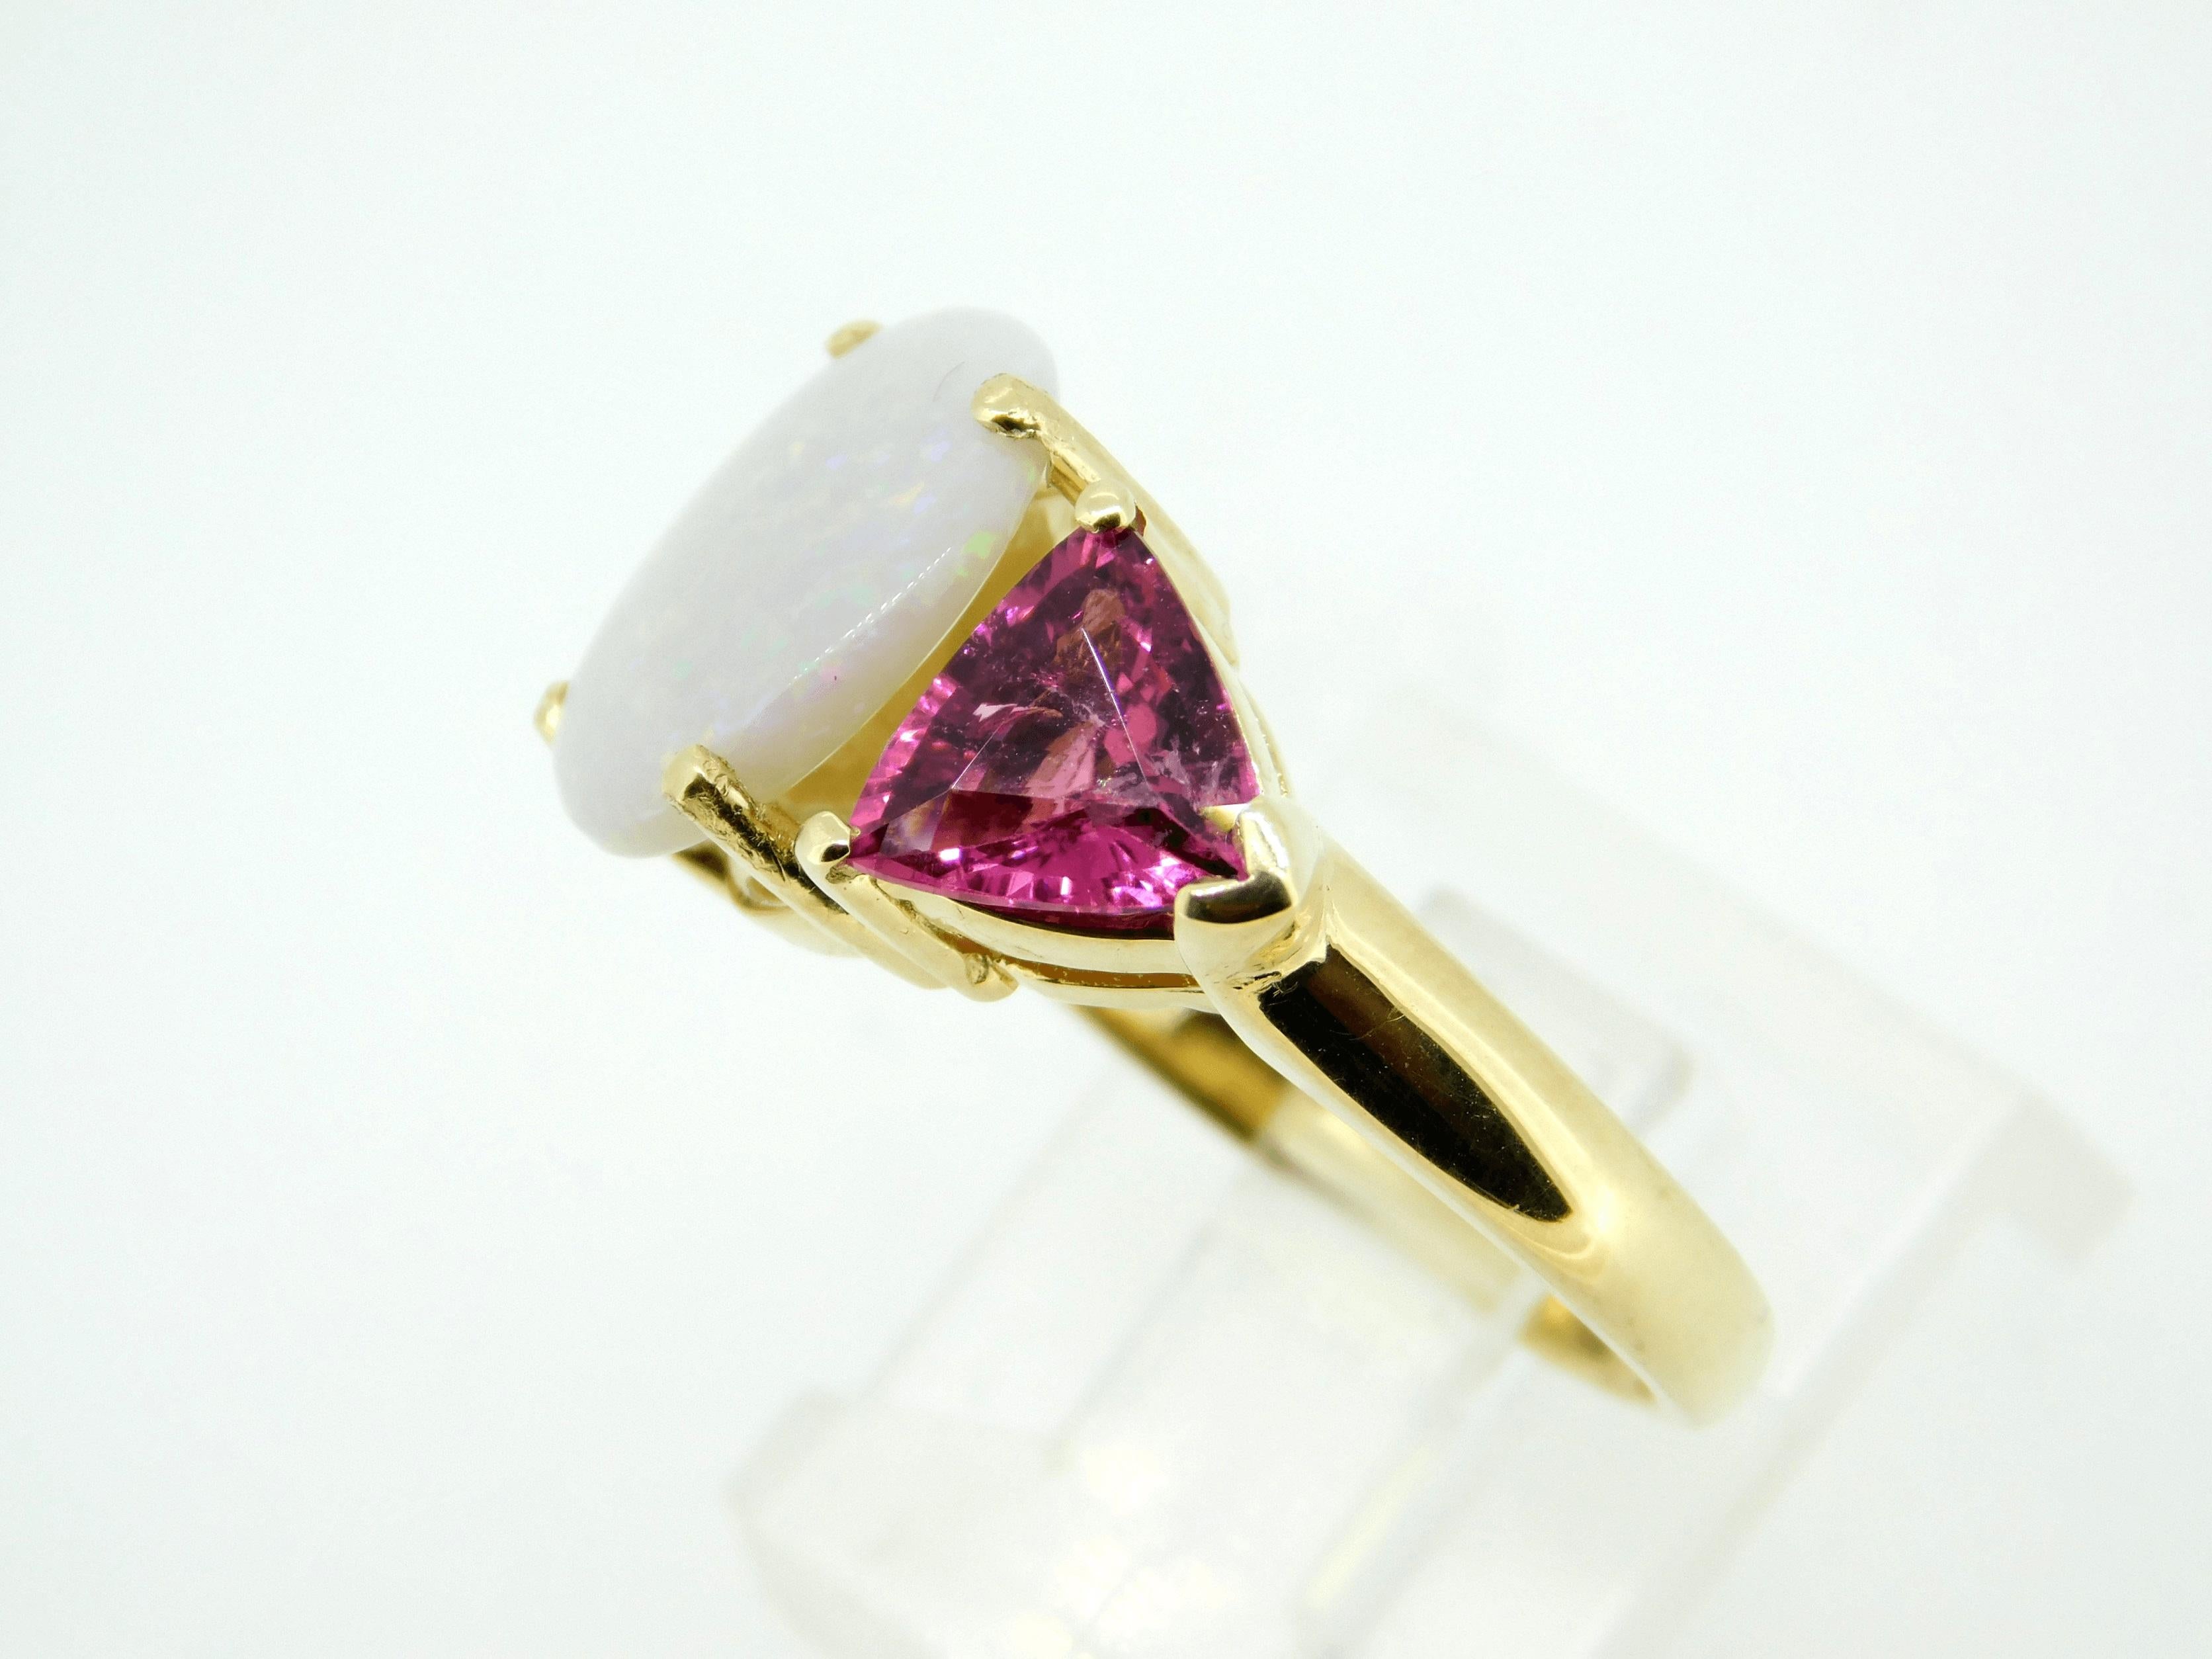 14k Yellow Gold Genuine Natural Opal and Pink Tourmaline Ring (#J4417)

14K yellow gold large three stone ring featuring a large opal and a pair of pink tourmaline trillions. The oval opal weighs 3.75 carats and measures 12x10mm. It has pink pin